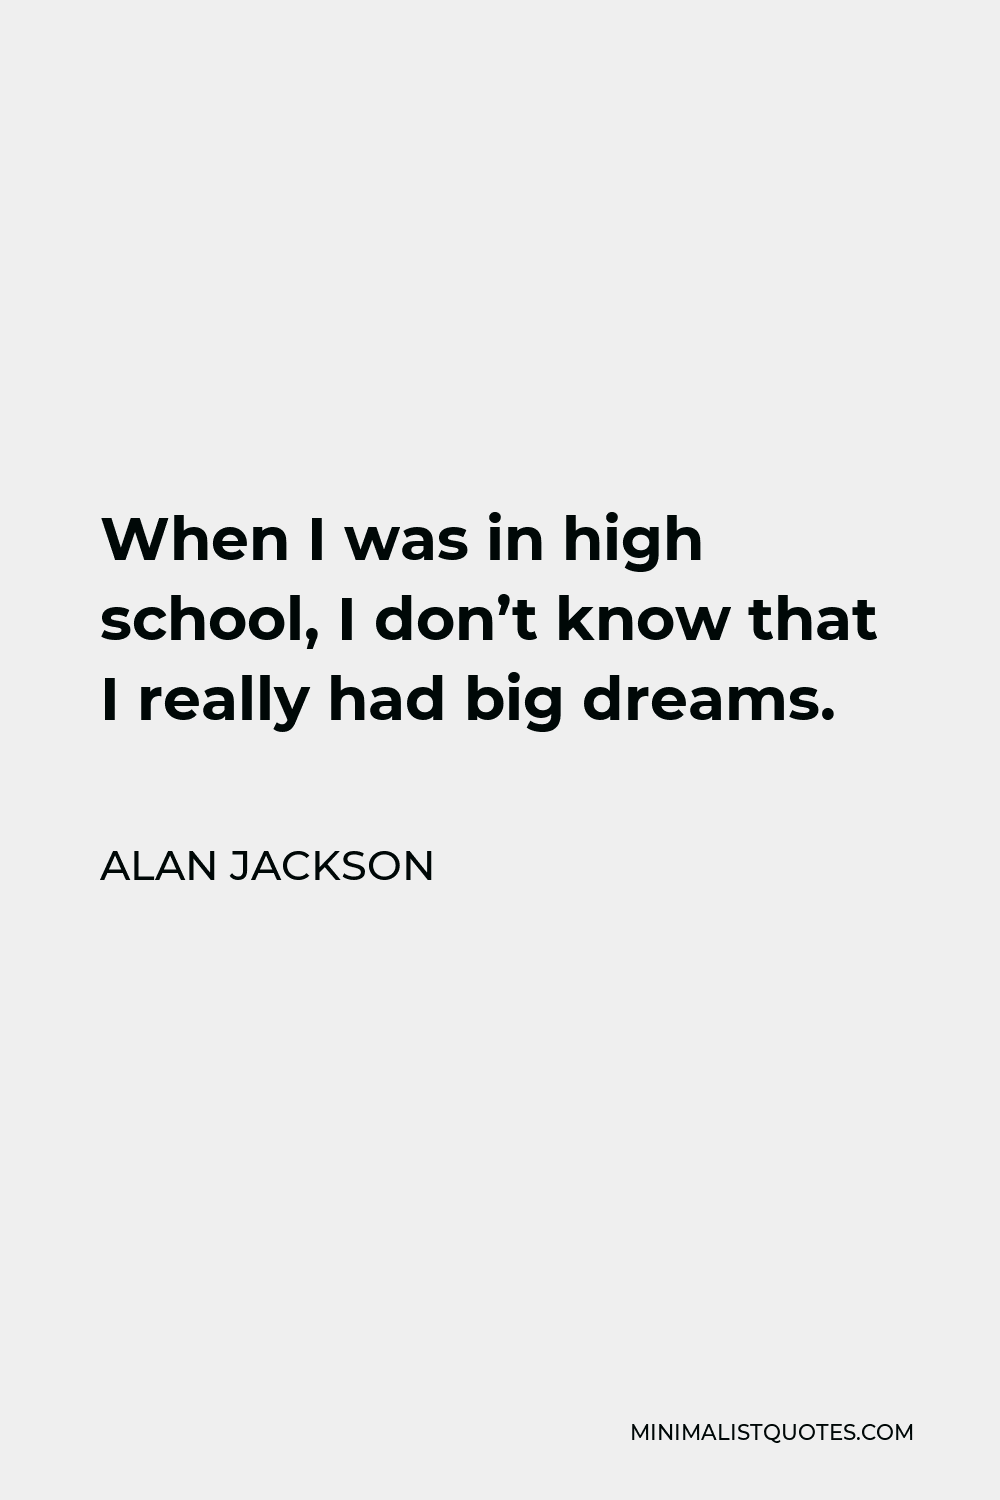 Alan Jackson Quote - When I was in high school, I don’t know that I really had big dreams.